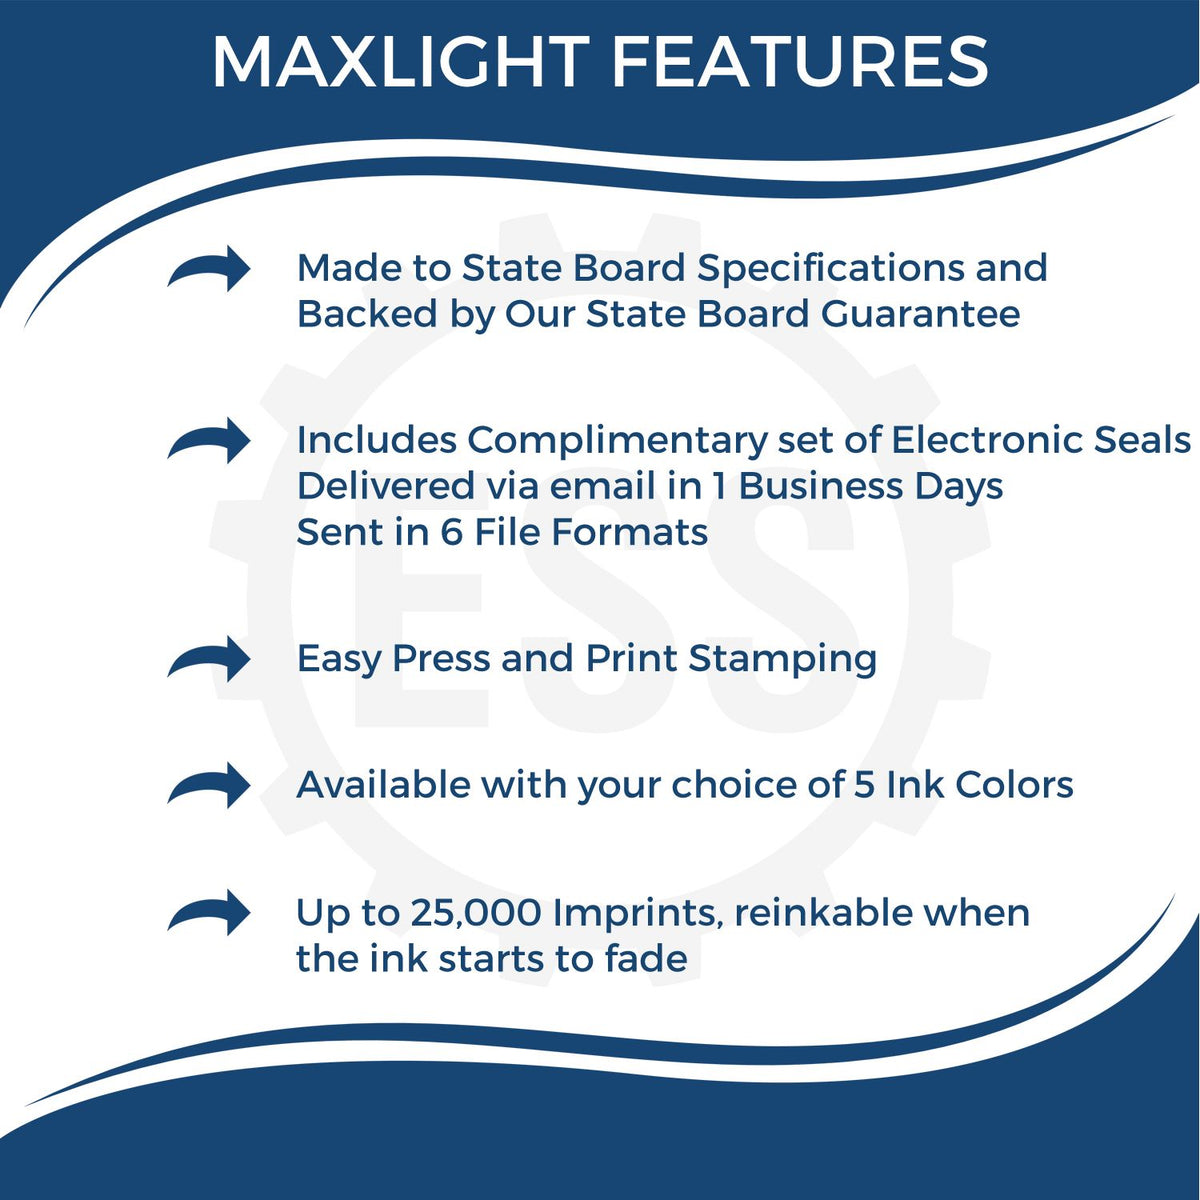 A picture of an infographic highlighting the selling points for the Premium MaxLight Pre-Inked North Dakota Landscape Architectural Stamp